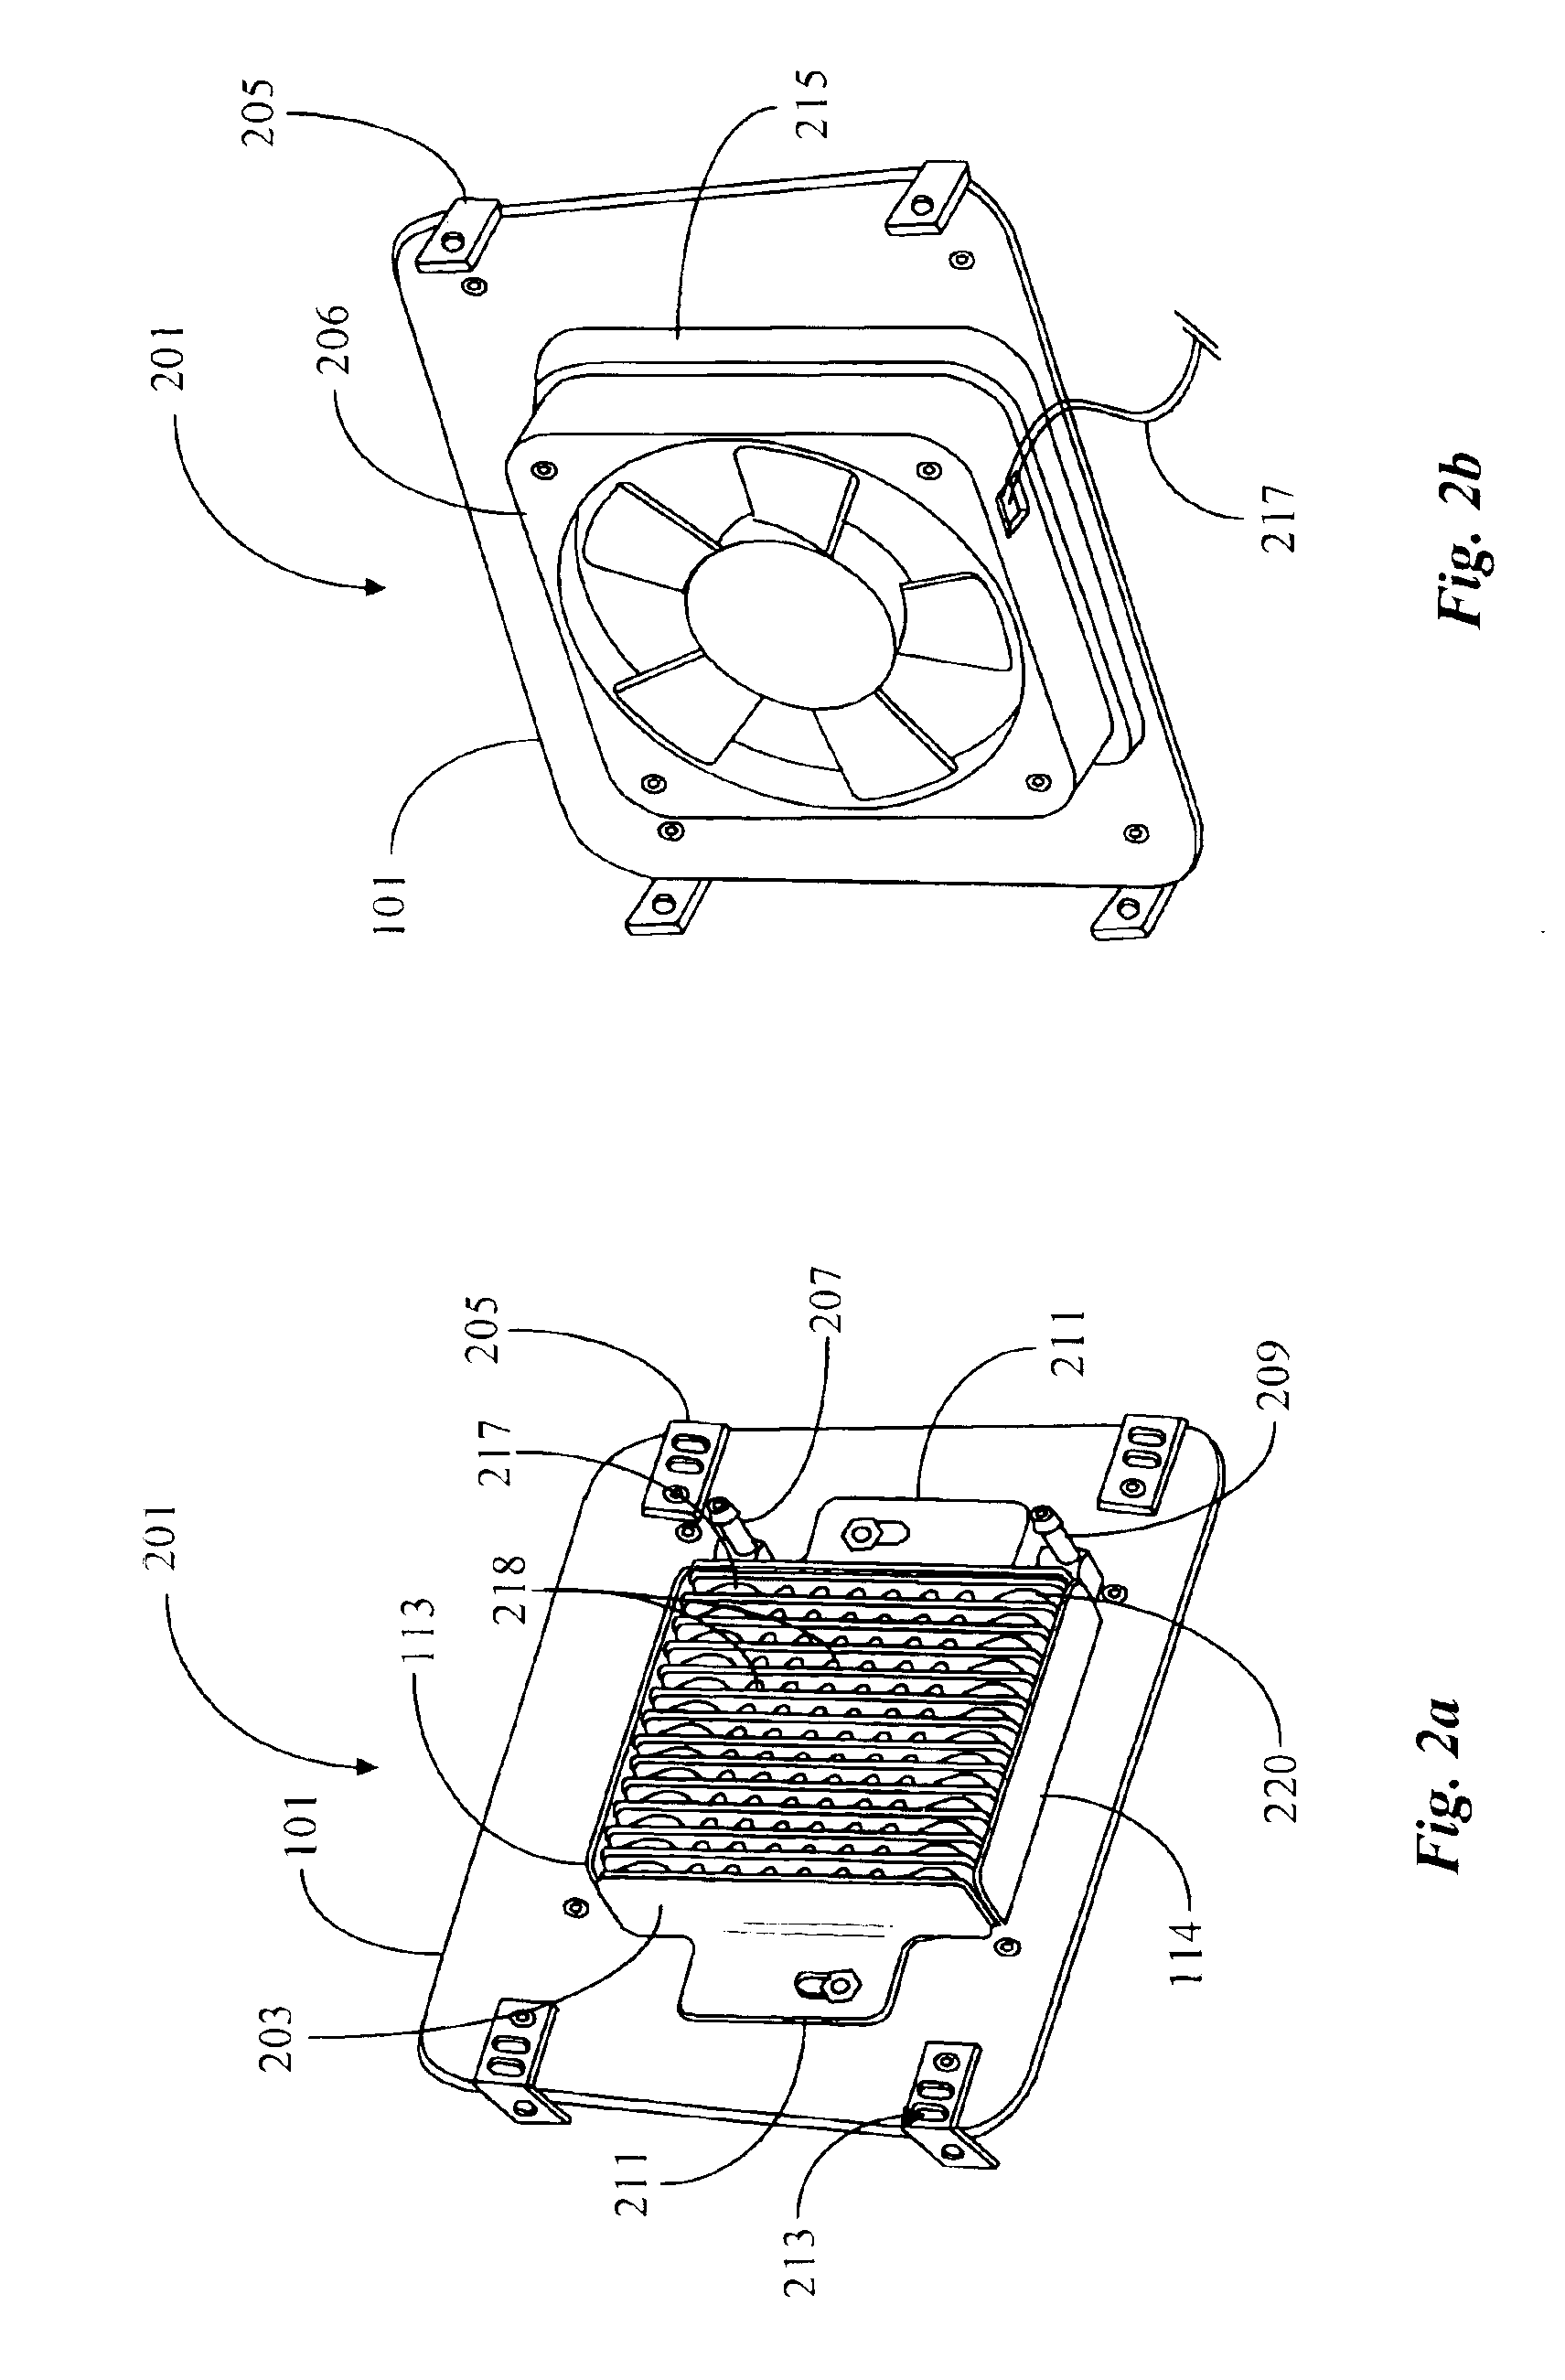 Method and apparatus for efficiently cooling motorcycle engines